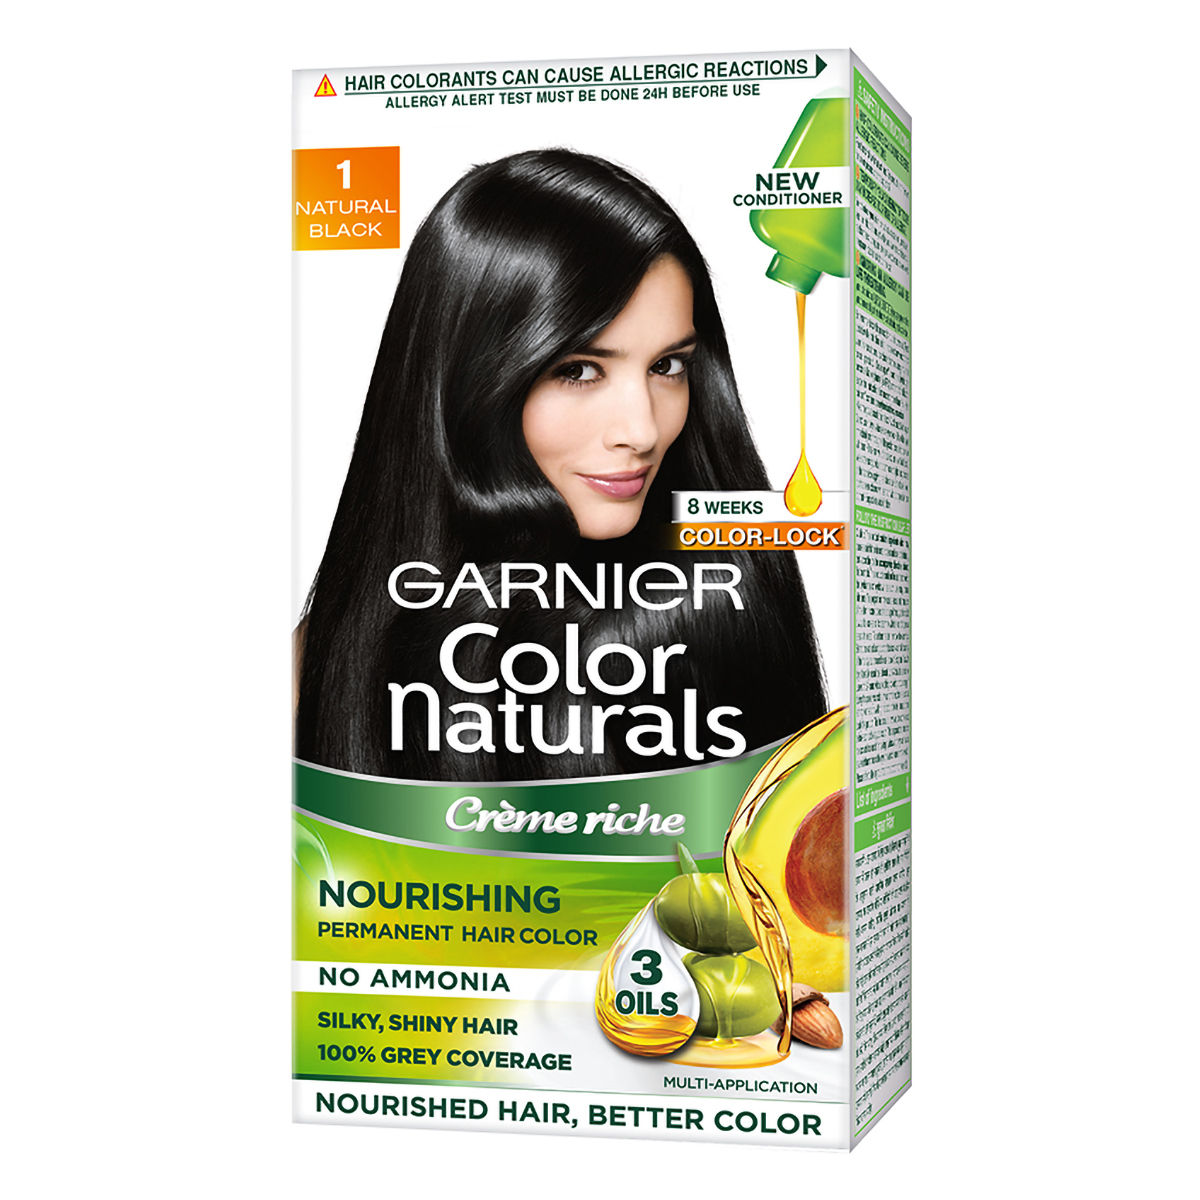 Buy Garnier Color Naturals Creme hair color, Shade 5 Light Brown 105.6 gm  Online at Best Price - Beauty L3